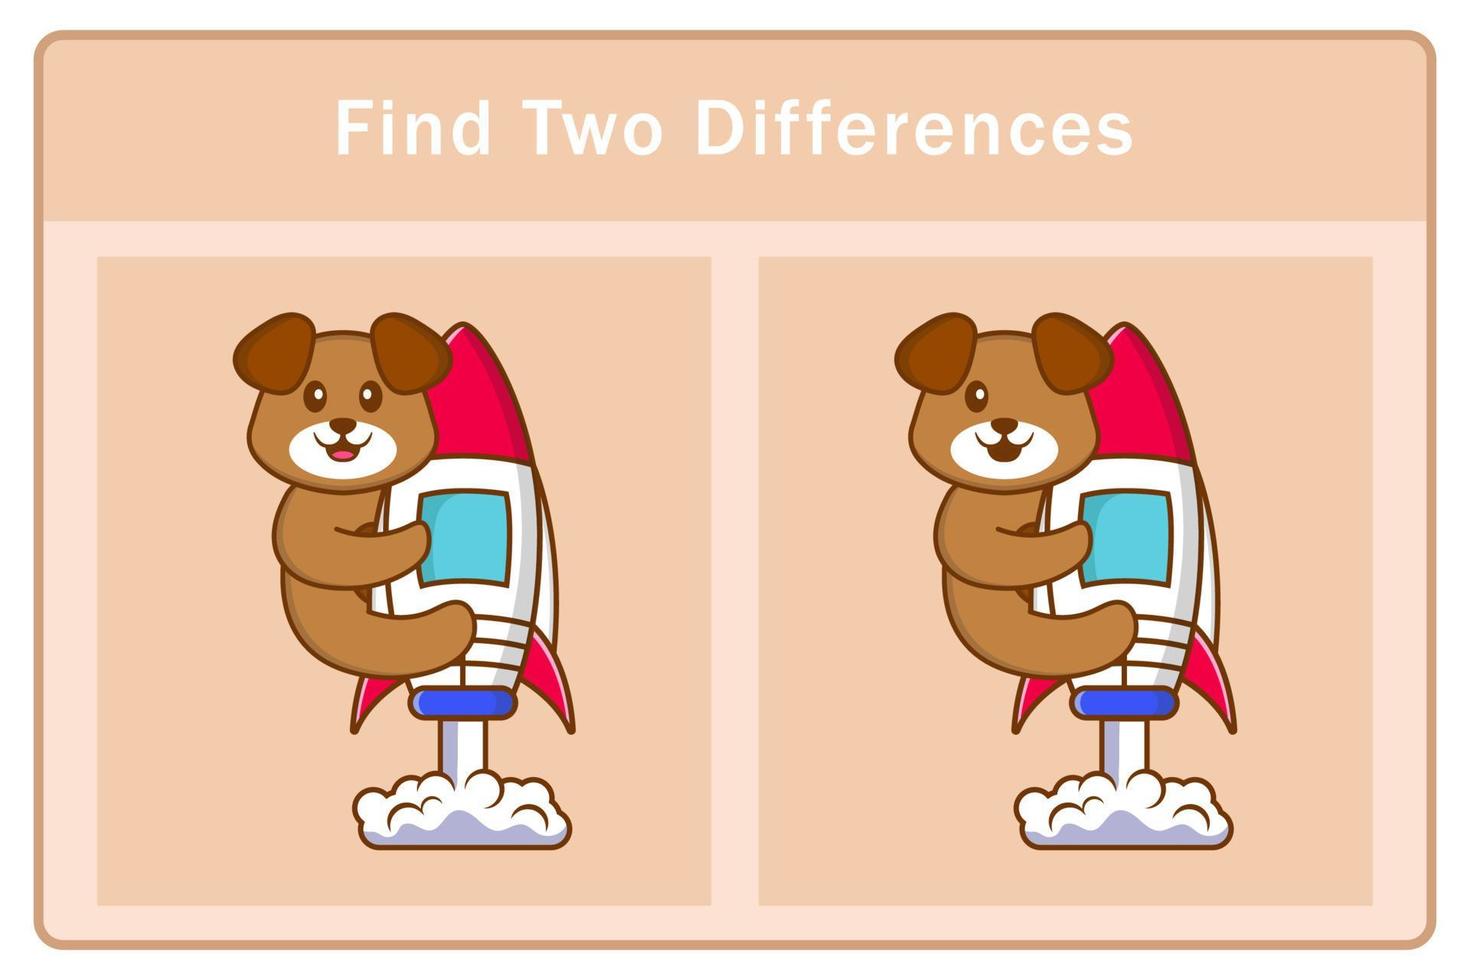 Cute dog cartoon character. Find differences. Educational game for children. Cartoon vector illustration